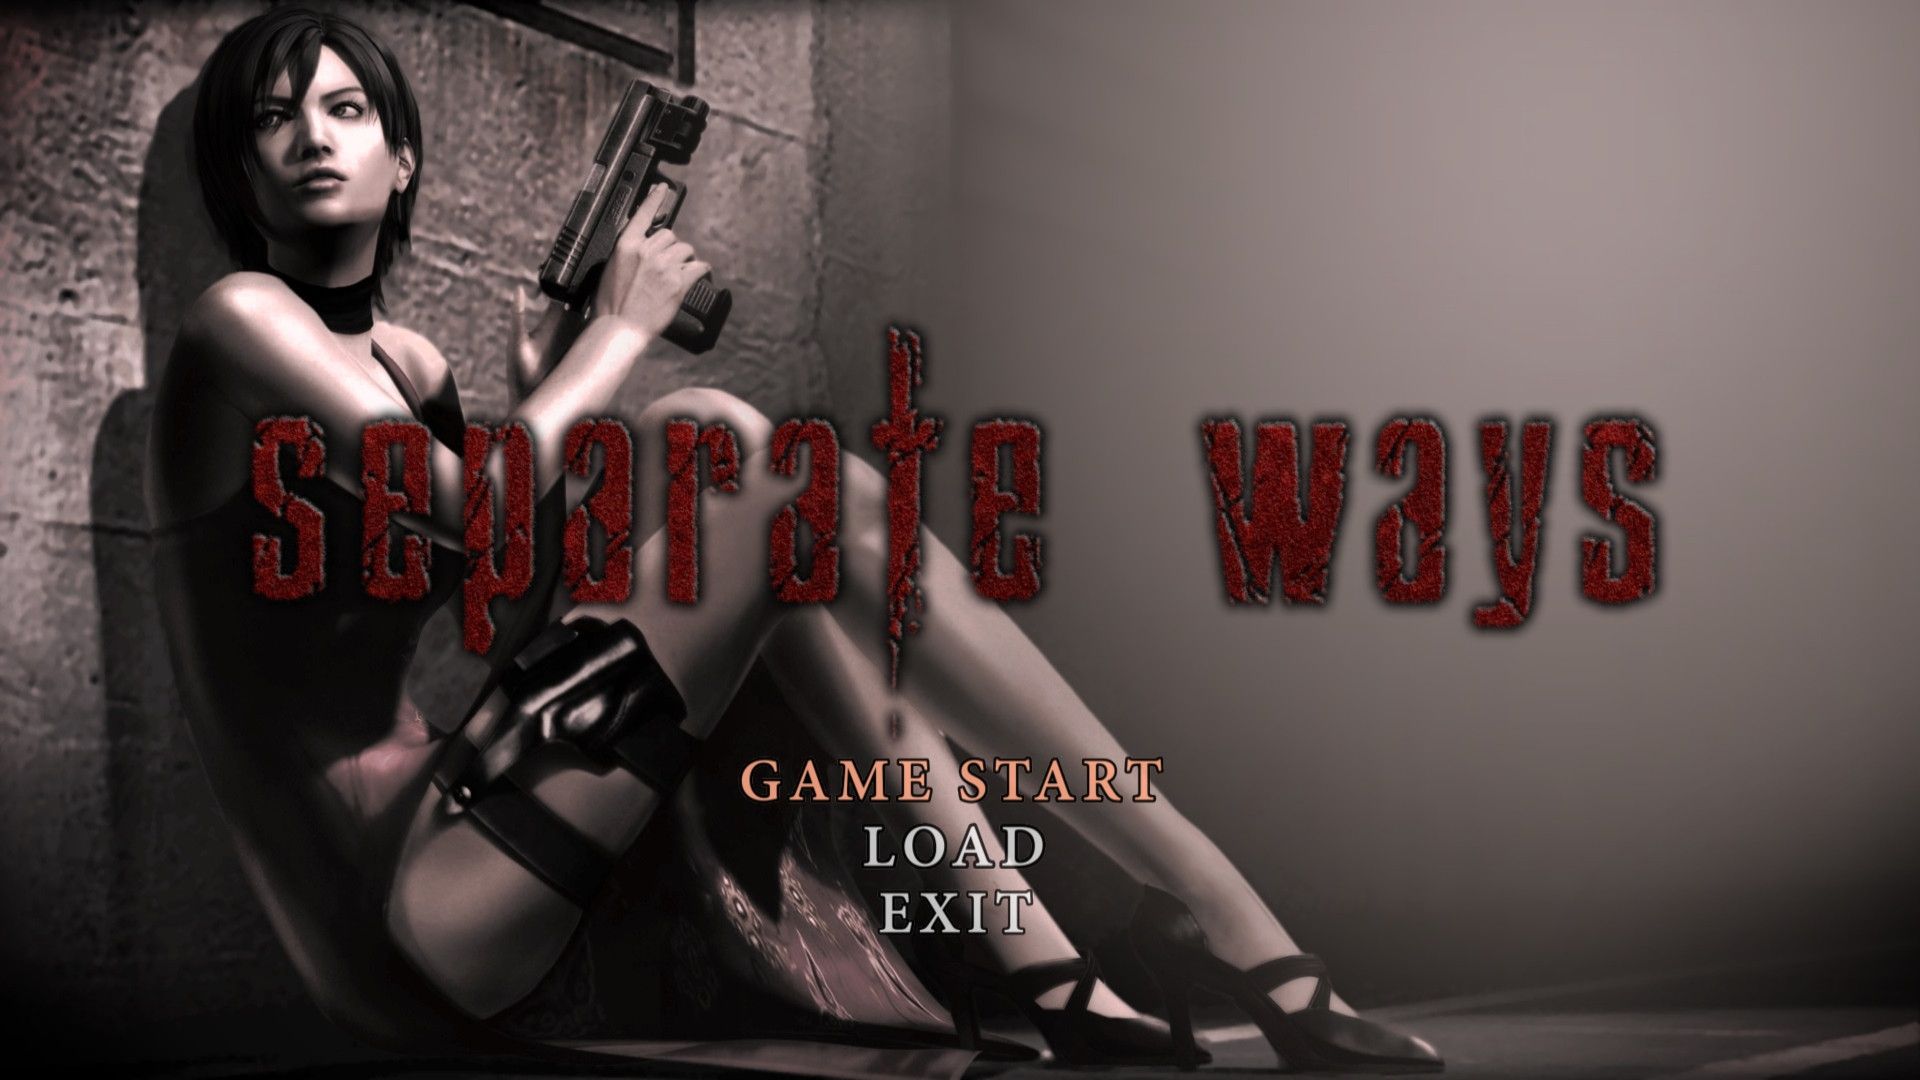 The title screen for Resident Evil 4's Separate Ways bonus mode, featuring Ada Wong sitting against a wall and holding up a pistol.